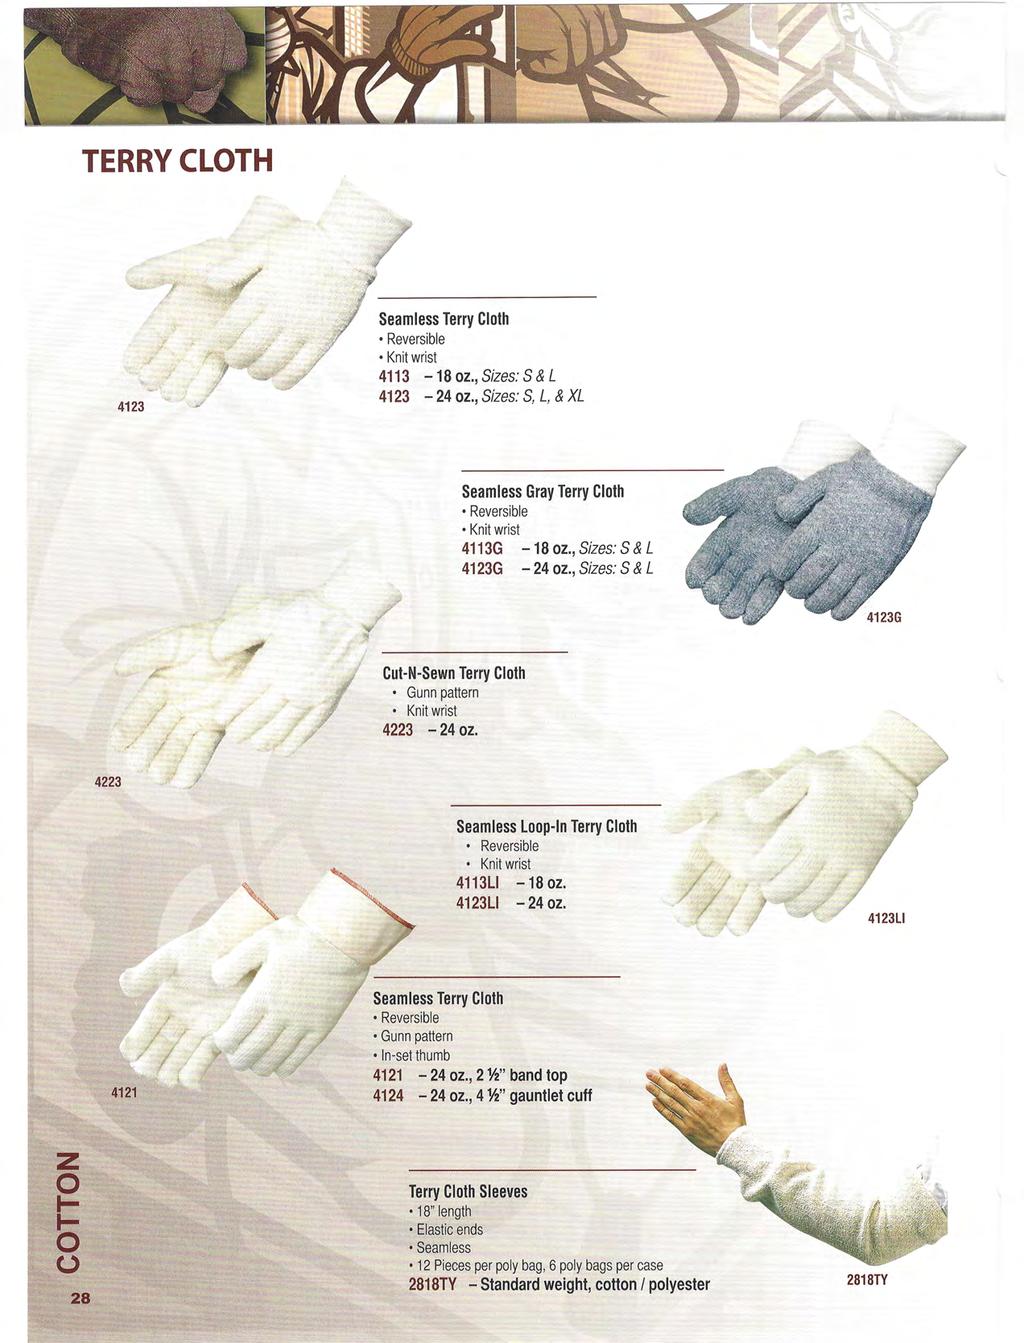 TERRYCLOTH 4123 7 / Seamless Terry Cloth Reversible Knit wrist 4113-18 oz., Sizes: S & L 4123-24 oz., Sizes: S, L, & XL f I Cut-N-Sewn / Terry Cloth Gunn pattern Knit wrist 4223-24 oz.